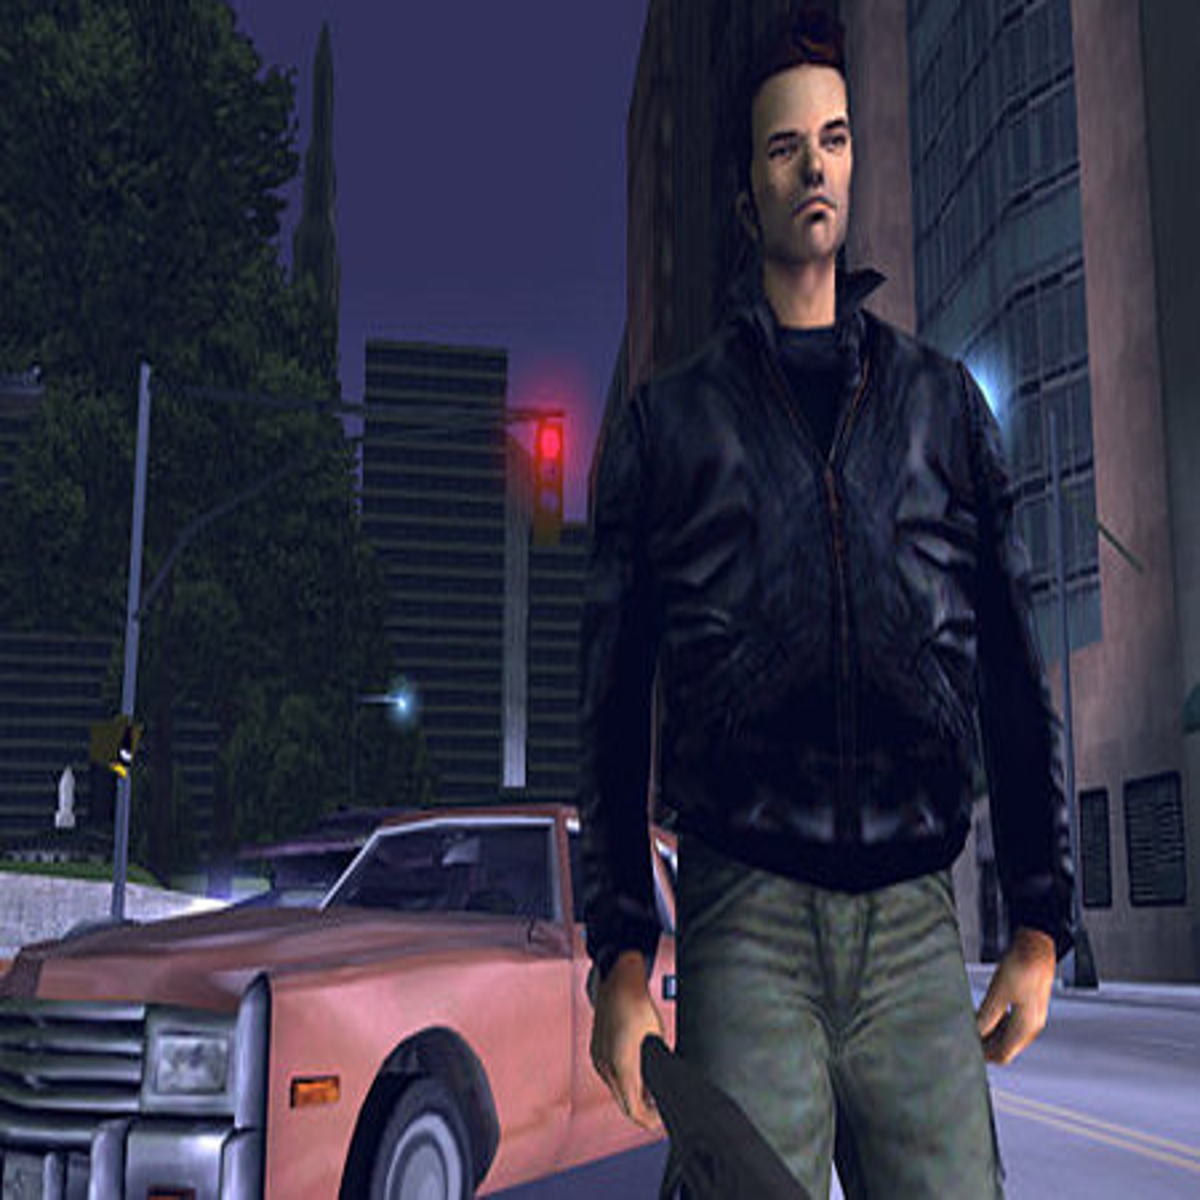 Grand Theft Auto III arrives in Android Market - Android Community